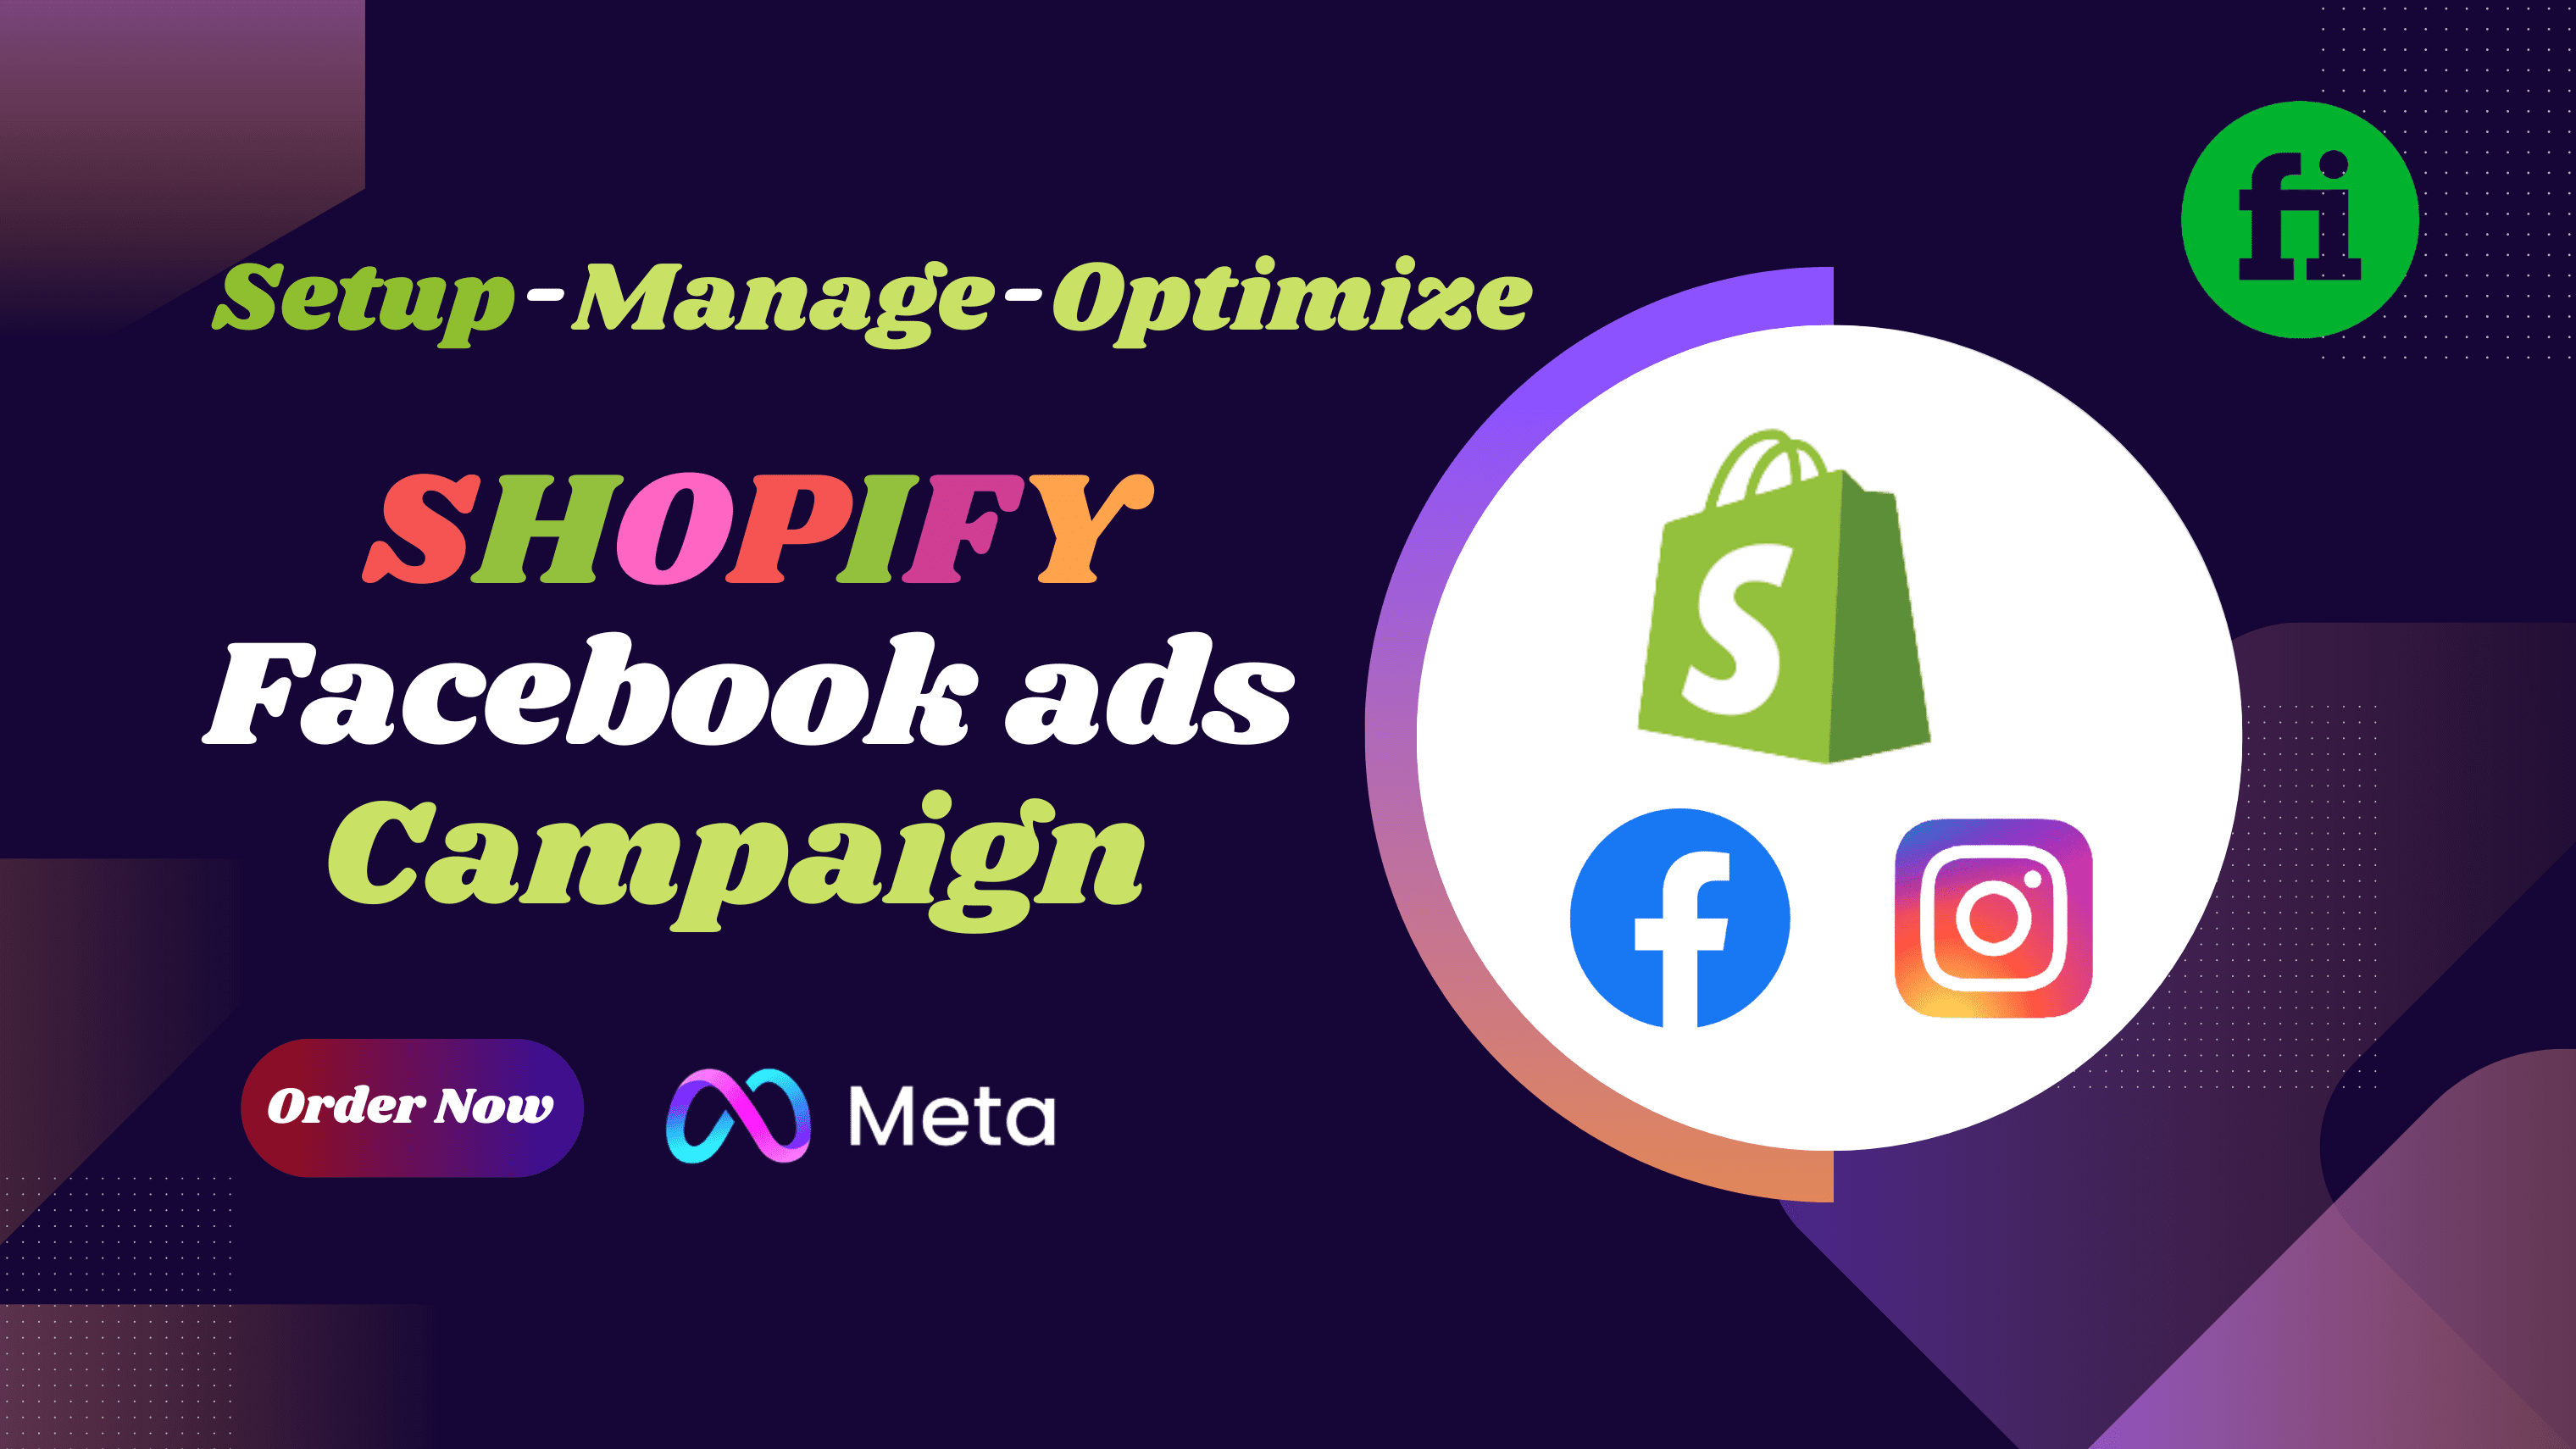 I will expert shopify facebook ads campaign Facebook video ads marketing for your business, FiverrBox